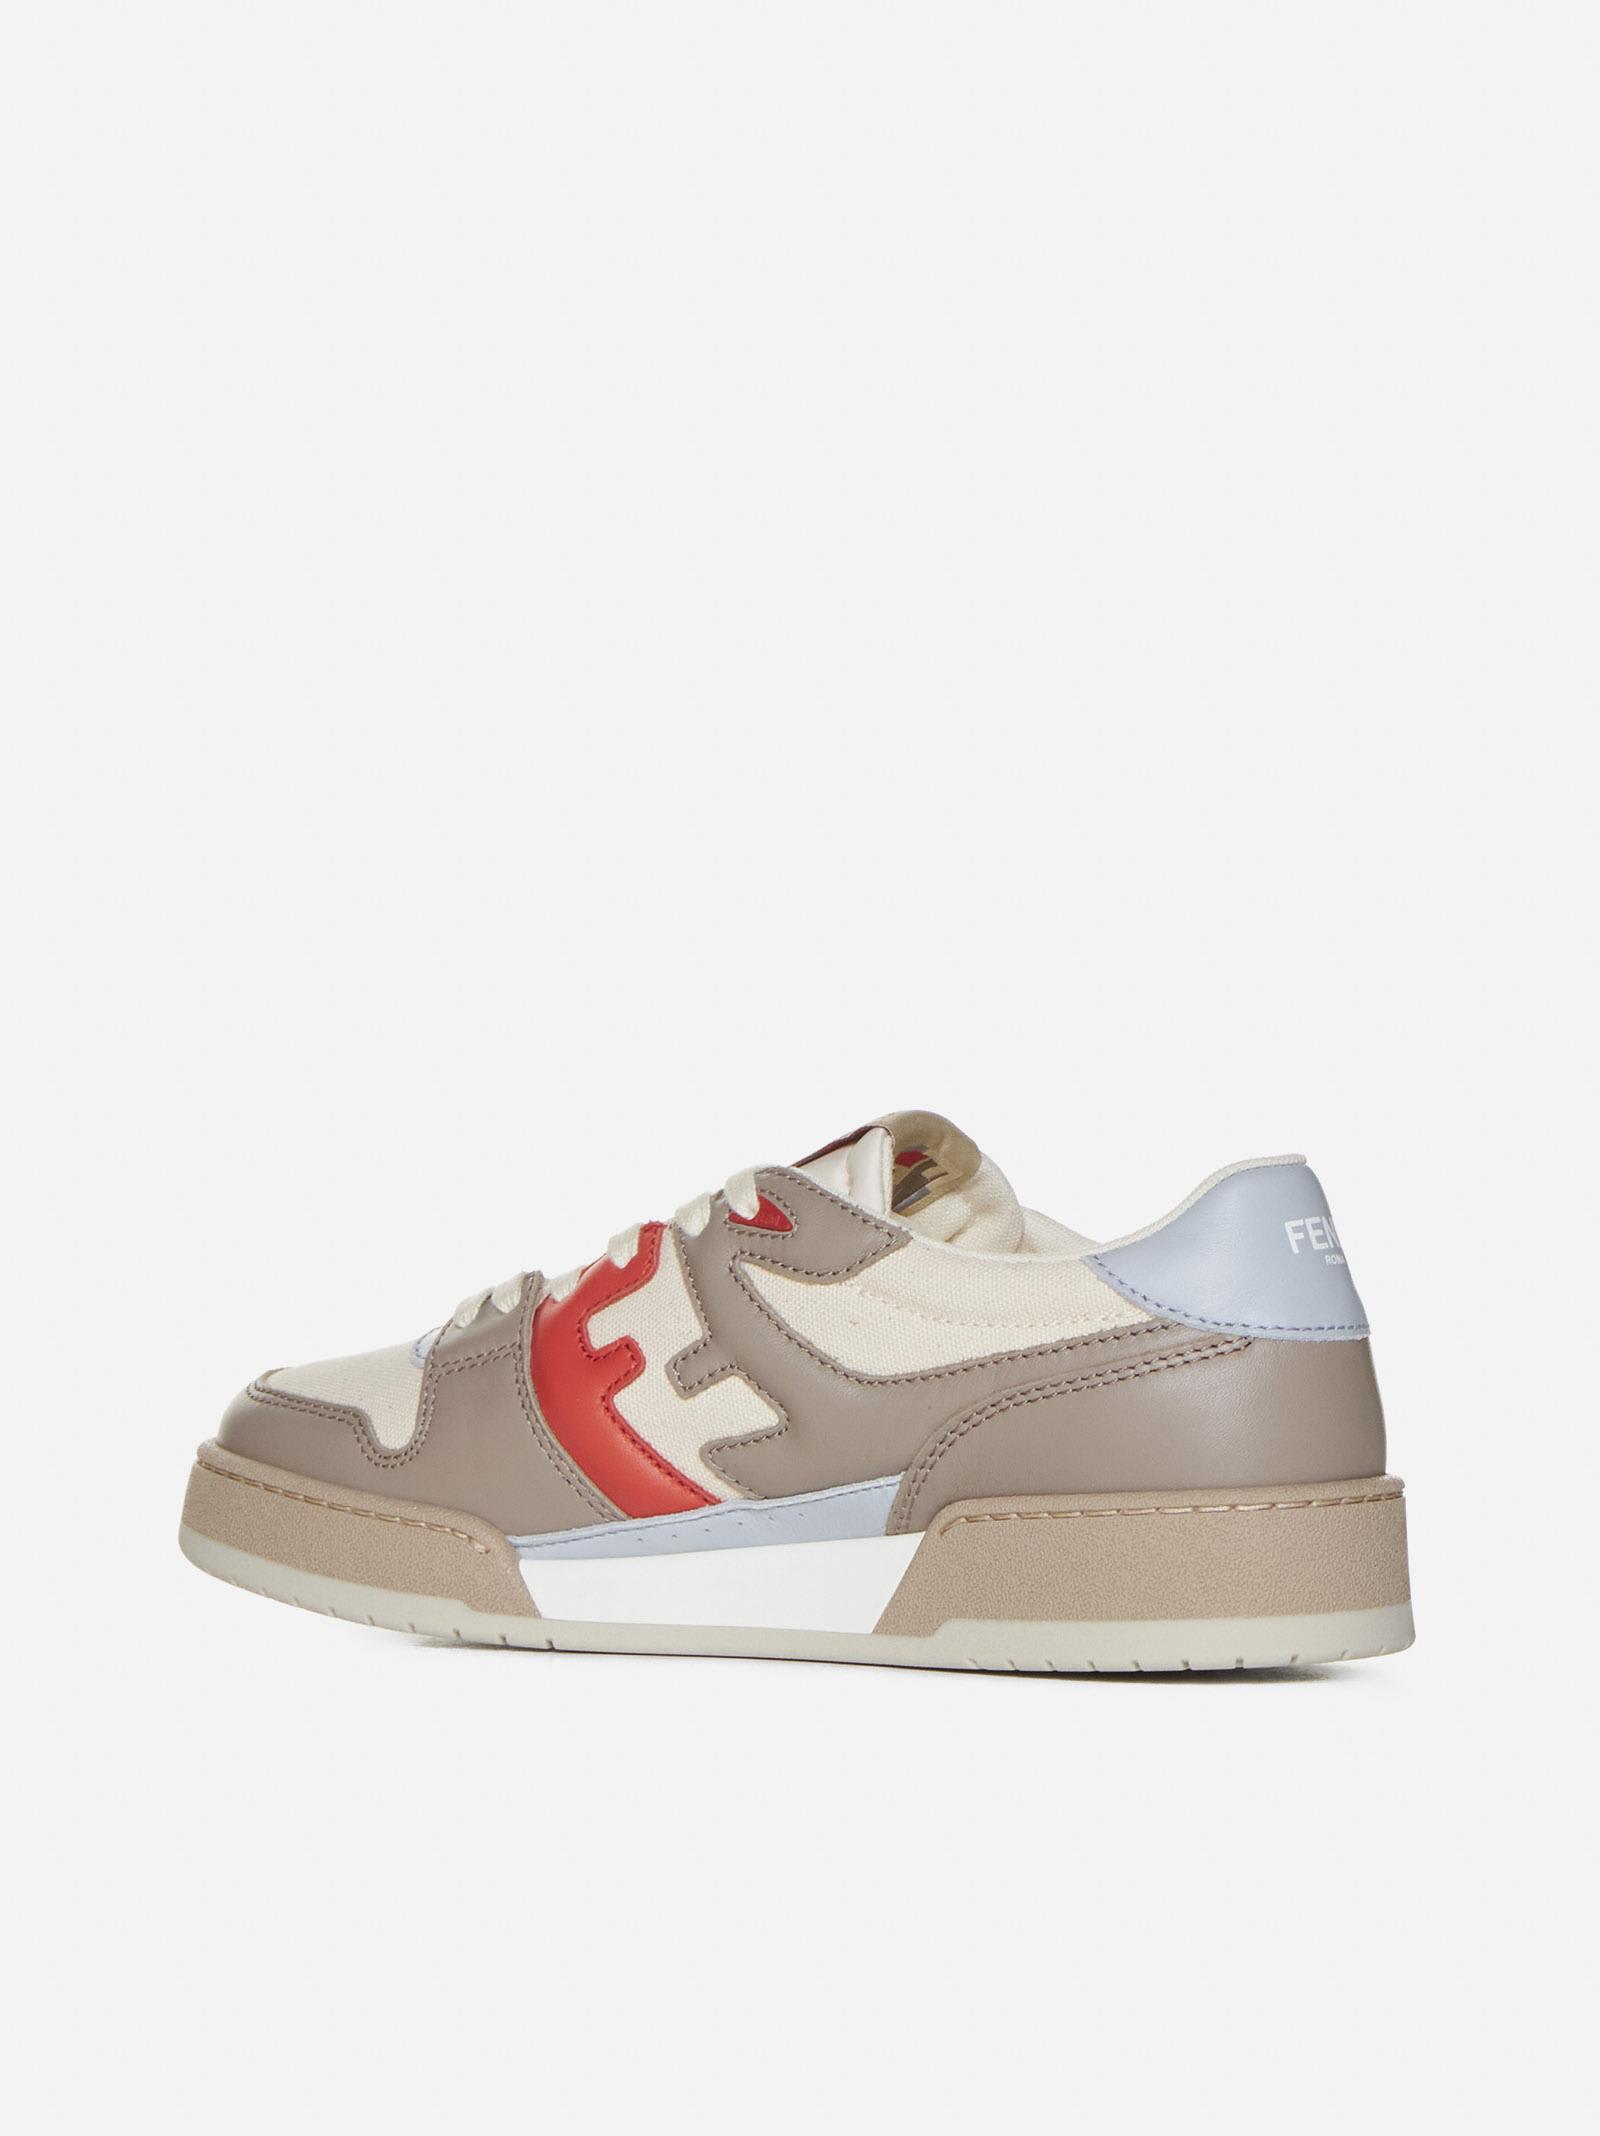 Shop Fendi Match Leather And Fabric Sneakers In Beige